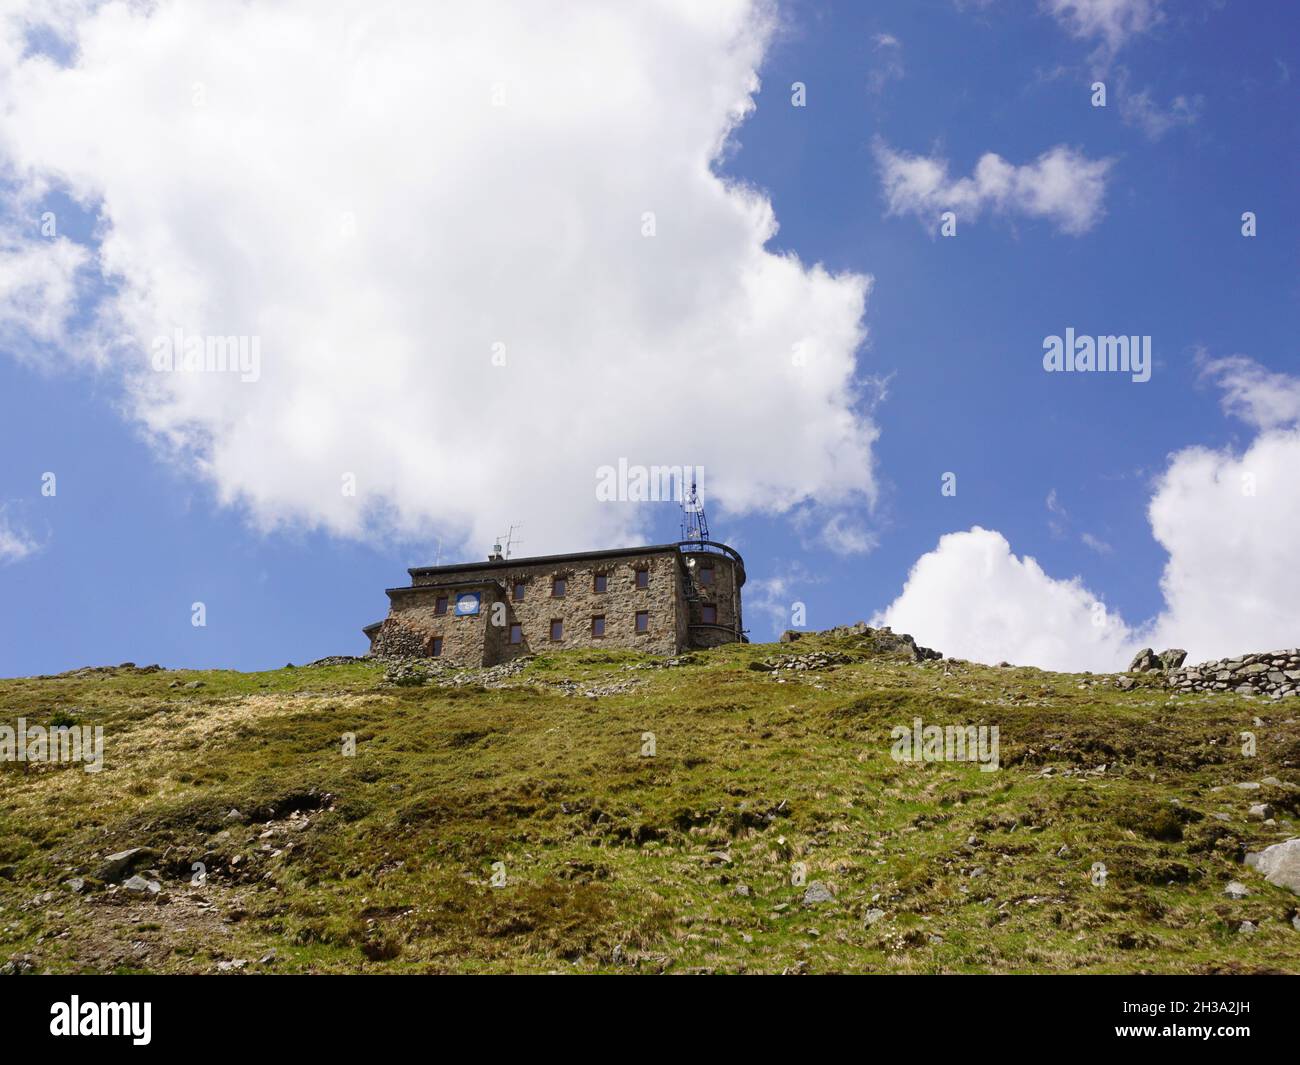 Building of The Meteorogical Observatory on Kasprowy Wierch in Tatra Mountains, Poland Stock Photo